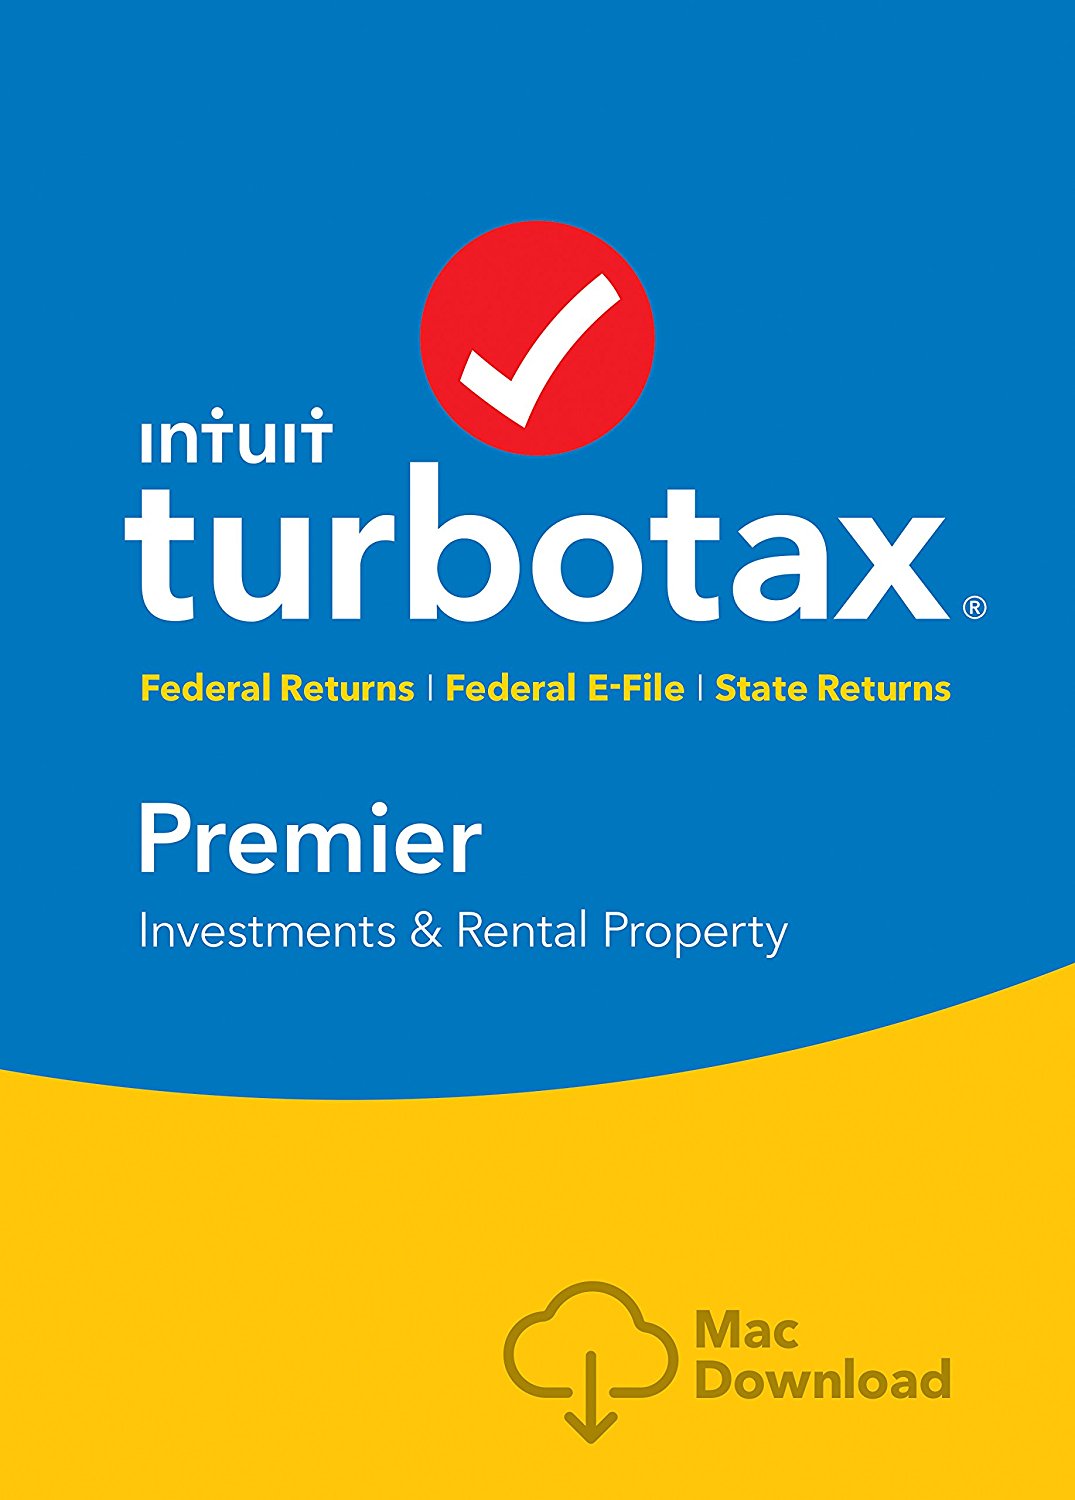 how to download turbotax 2014